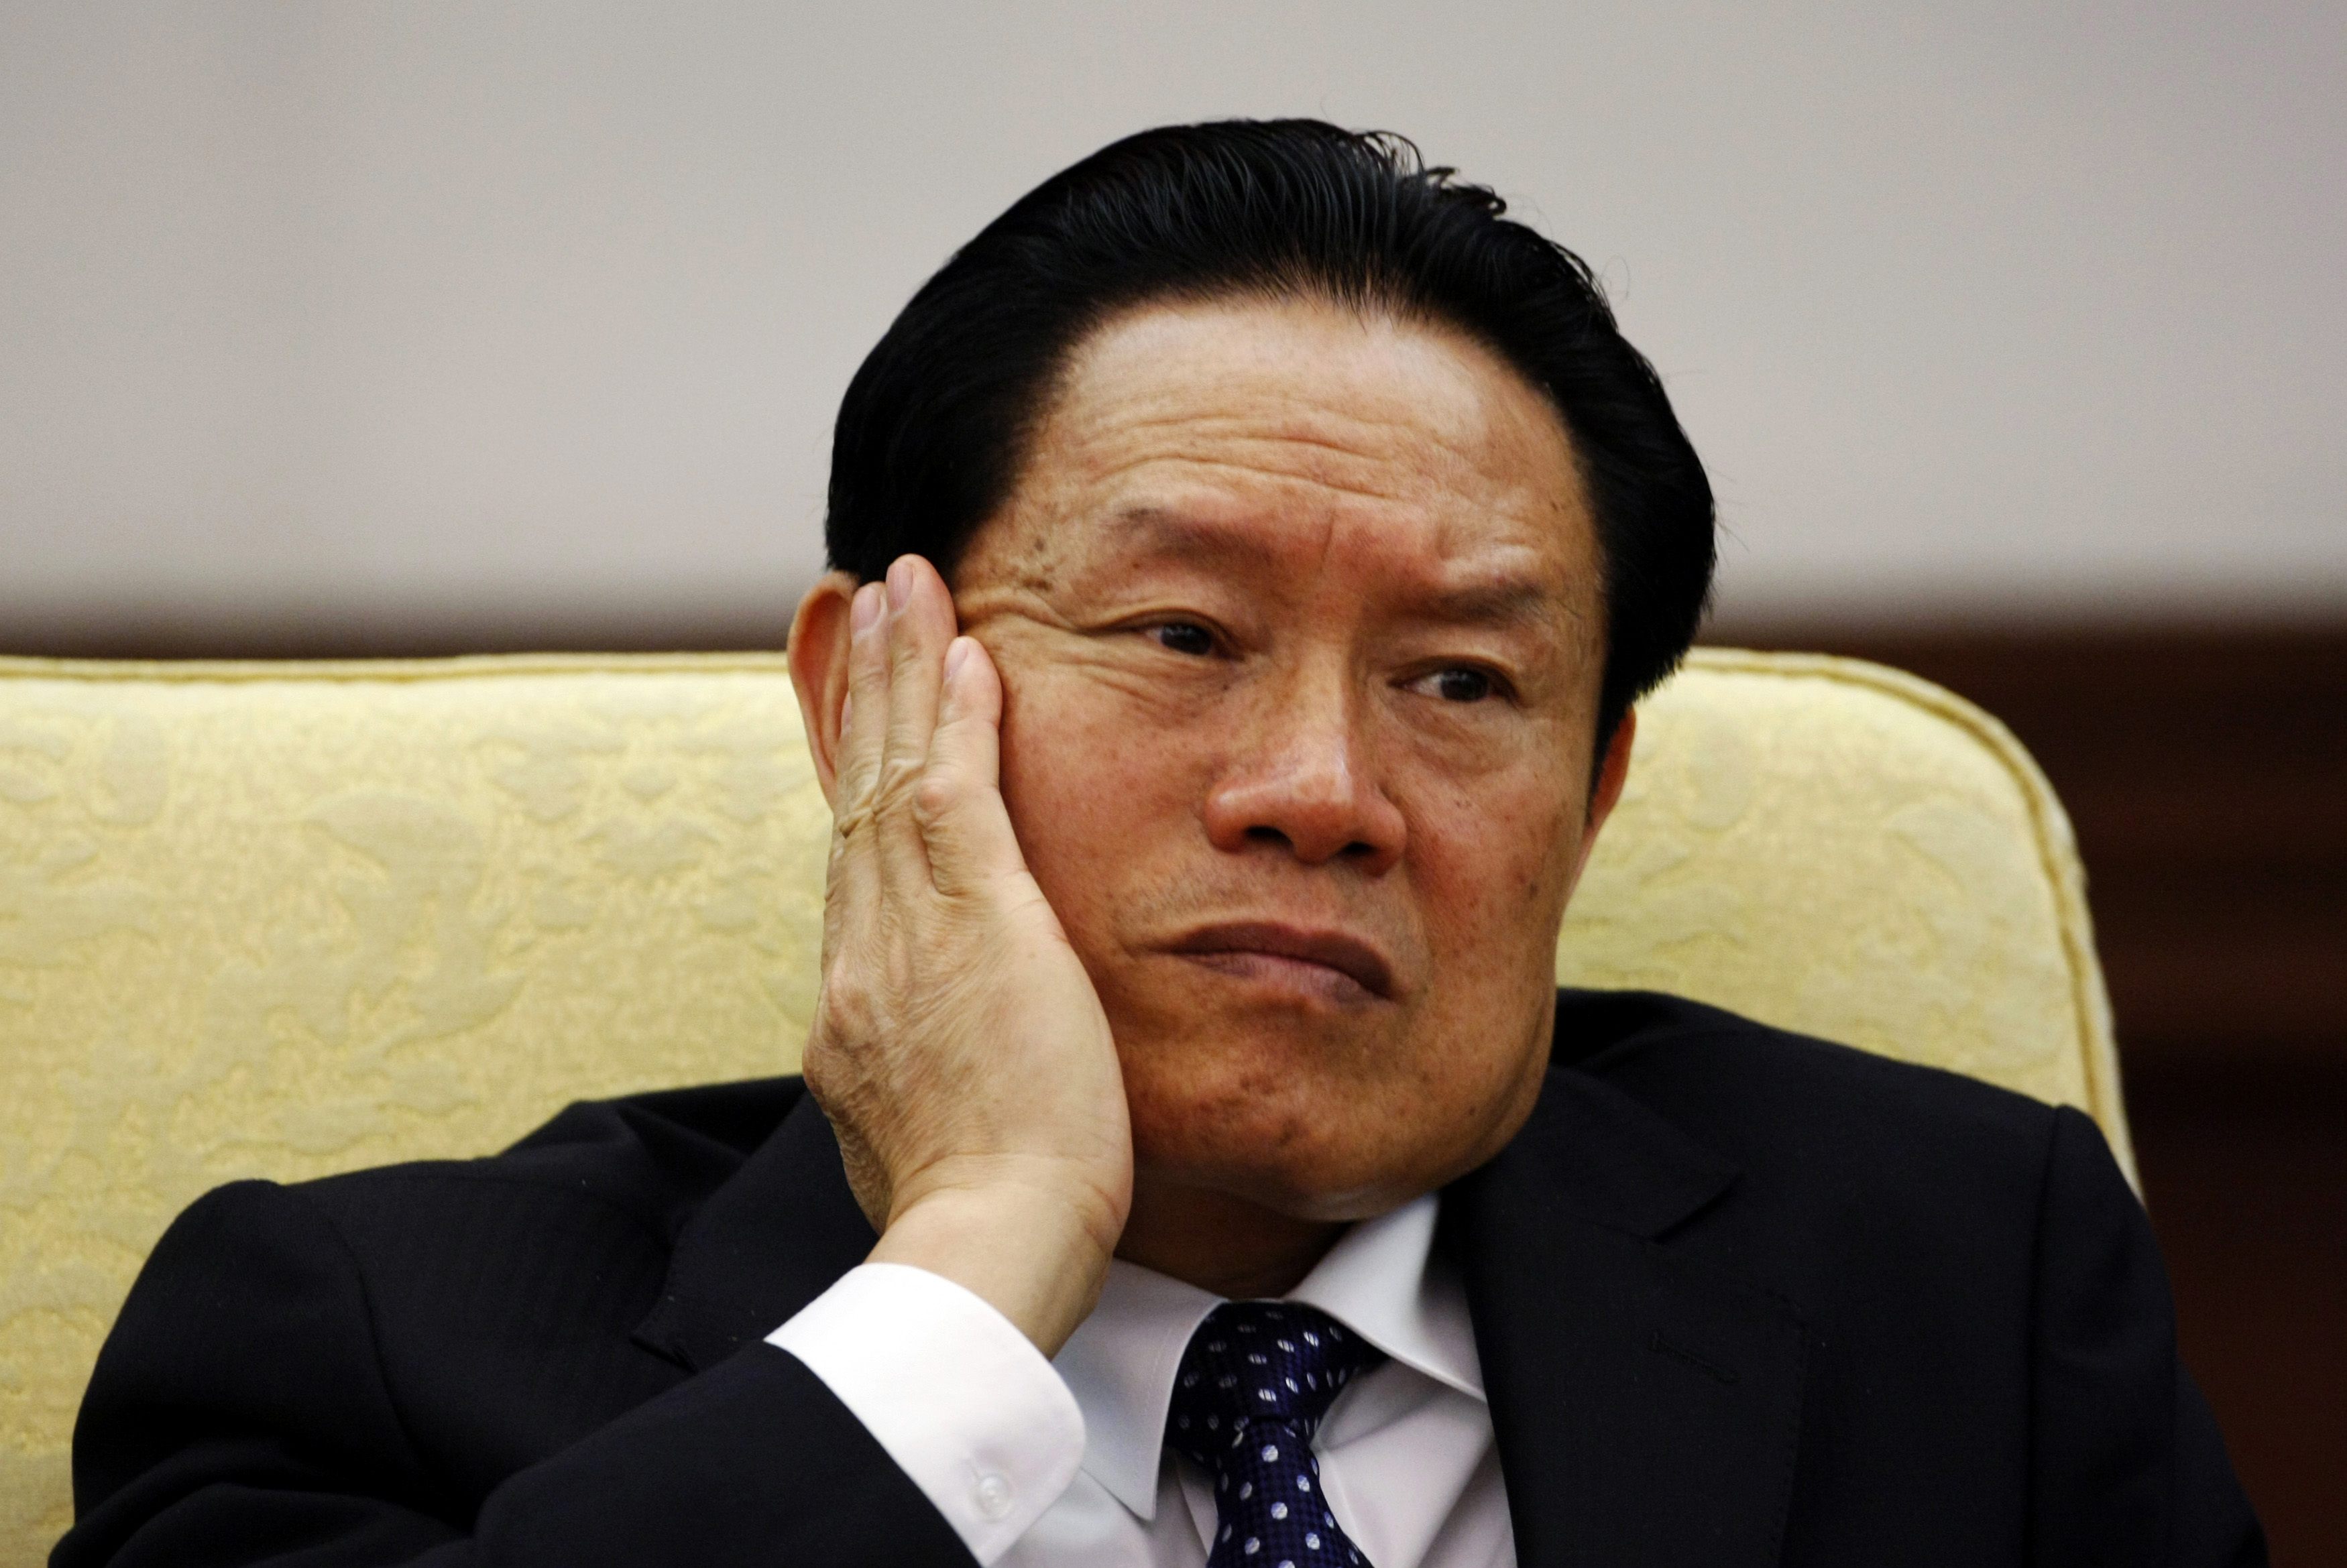 Then China's Public Security Minister Zhou Yongkang reacts as he attends the Hebei delegation discussion sessions at the 17th National Congress of the Communist Party of China at the Great Hall of the People in Beijing in this October 16, 2007 file photo. To match Special Report CHINA-PURGE/CNPC REUTERS/Jason Lee/Files (CHINA - Tags: POLITICS BUSINESS ENERGY HEADSHOT)